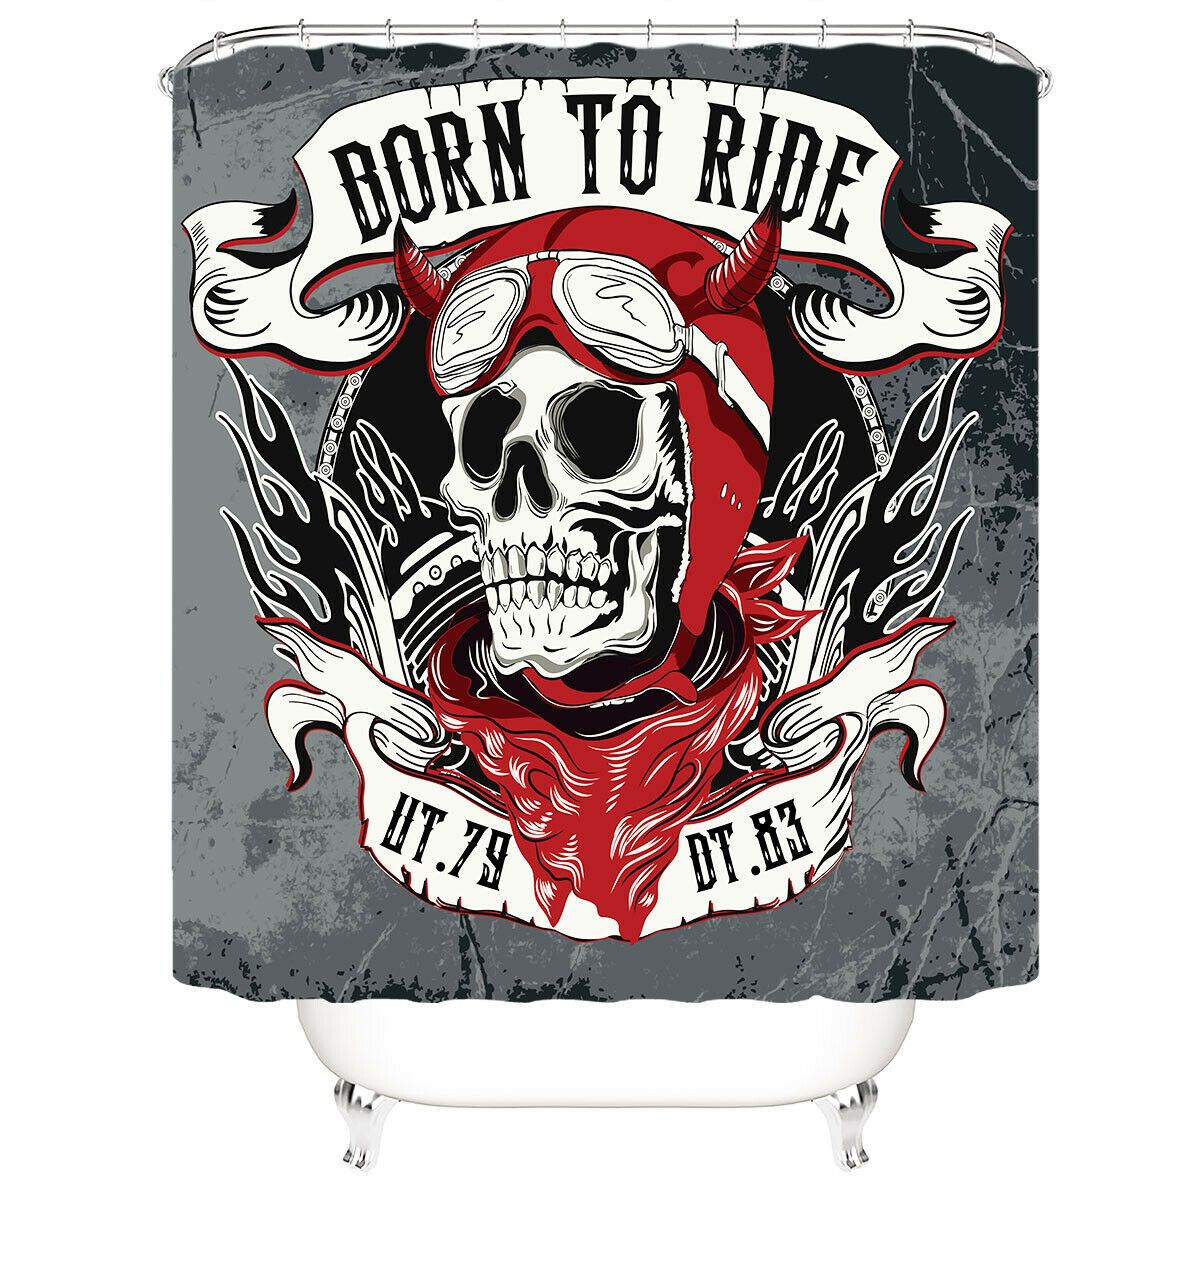 Born To Ride Fabric Shower Curtain For Bathroom-STYLEGOING